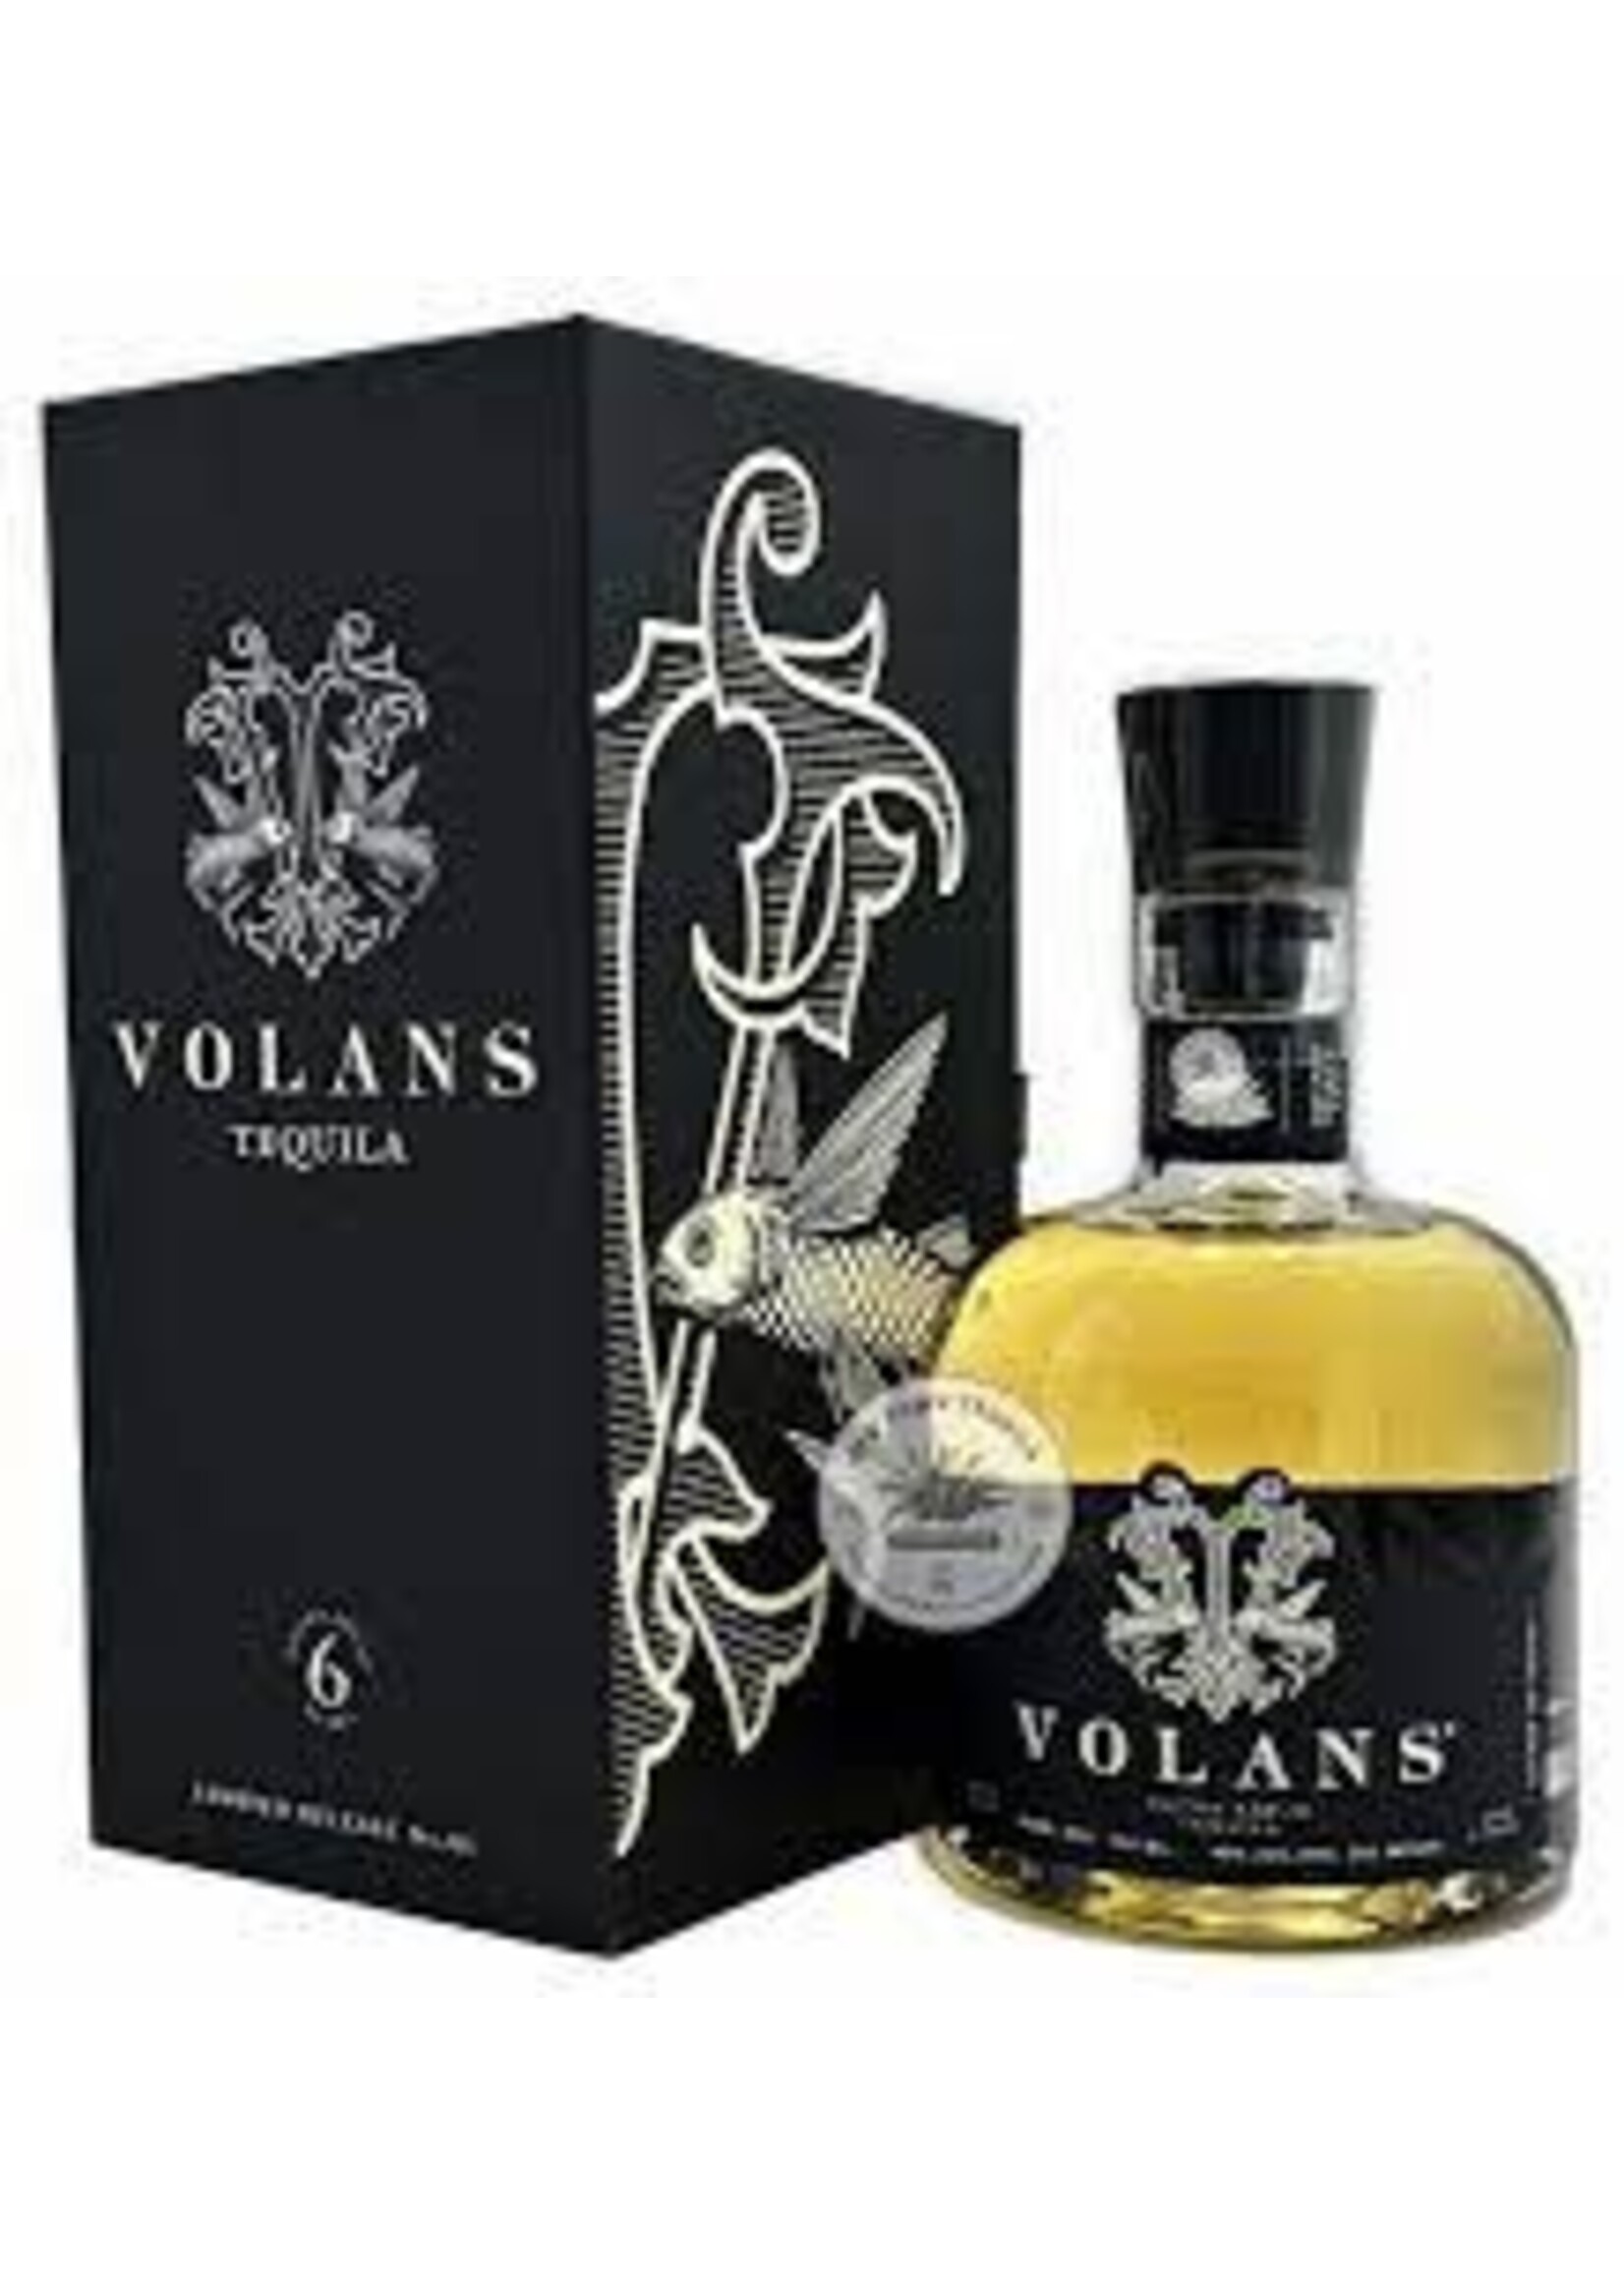 Volans Tequila Limited Edition 6 year old Extra Anejo 750ml